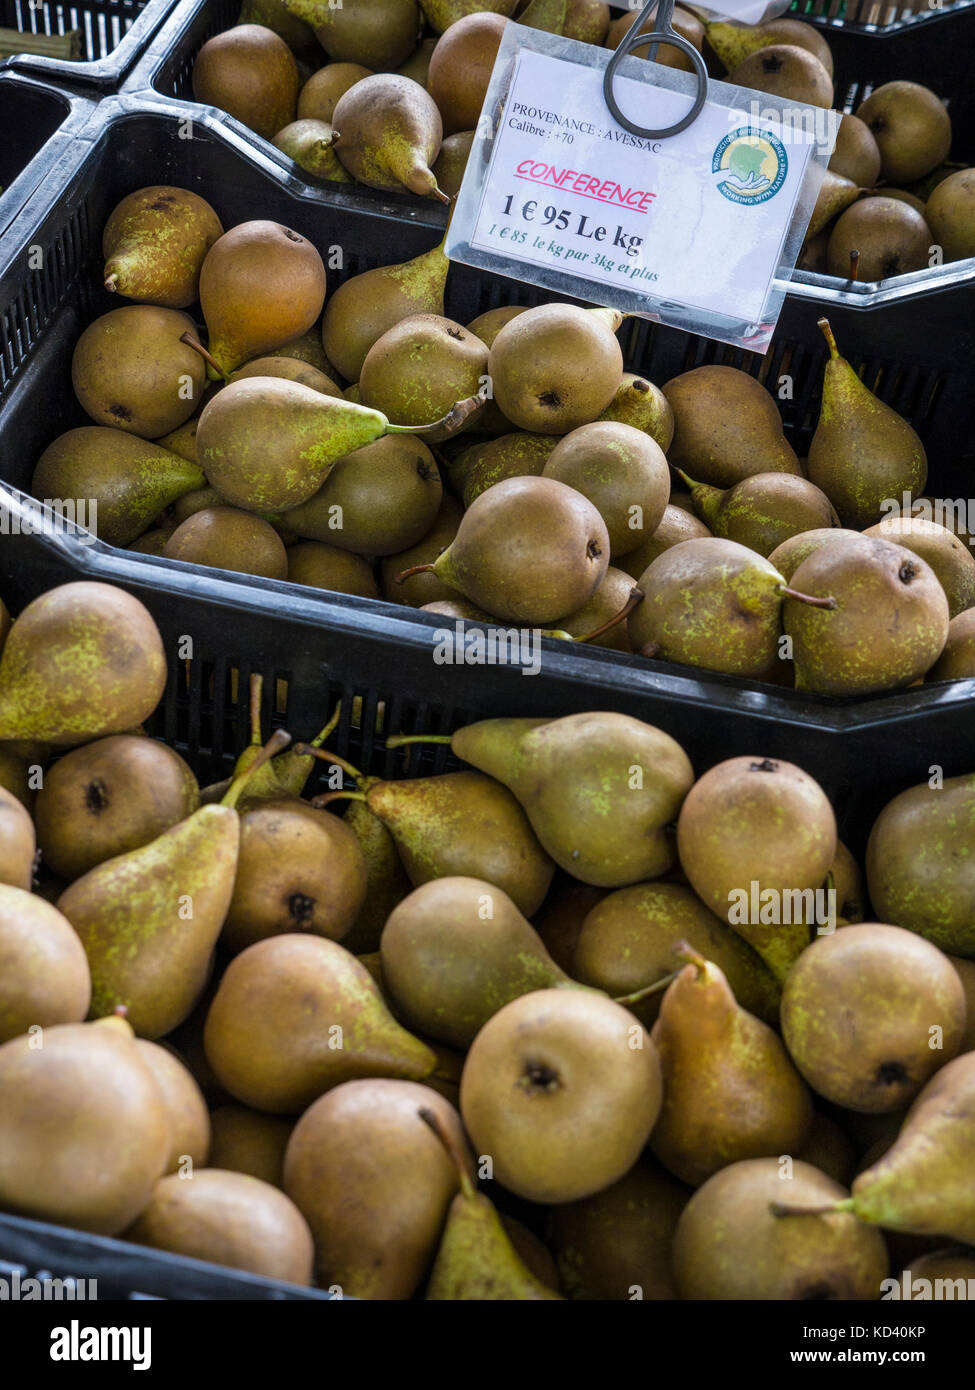 FRENCH CONFERENCE PEARS on sale at Concarneau outdoor market stall with Kilo Euro price tag Concarneau Brittany France Stock Photo